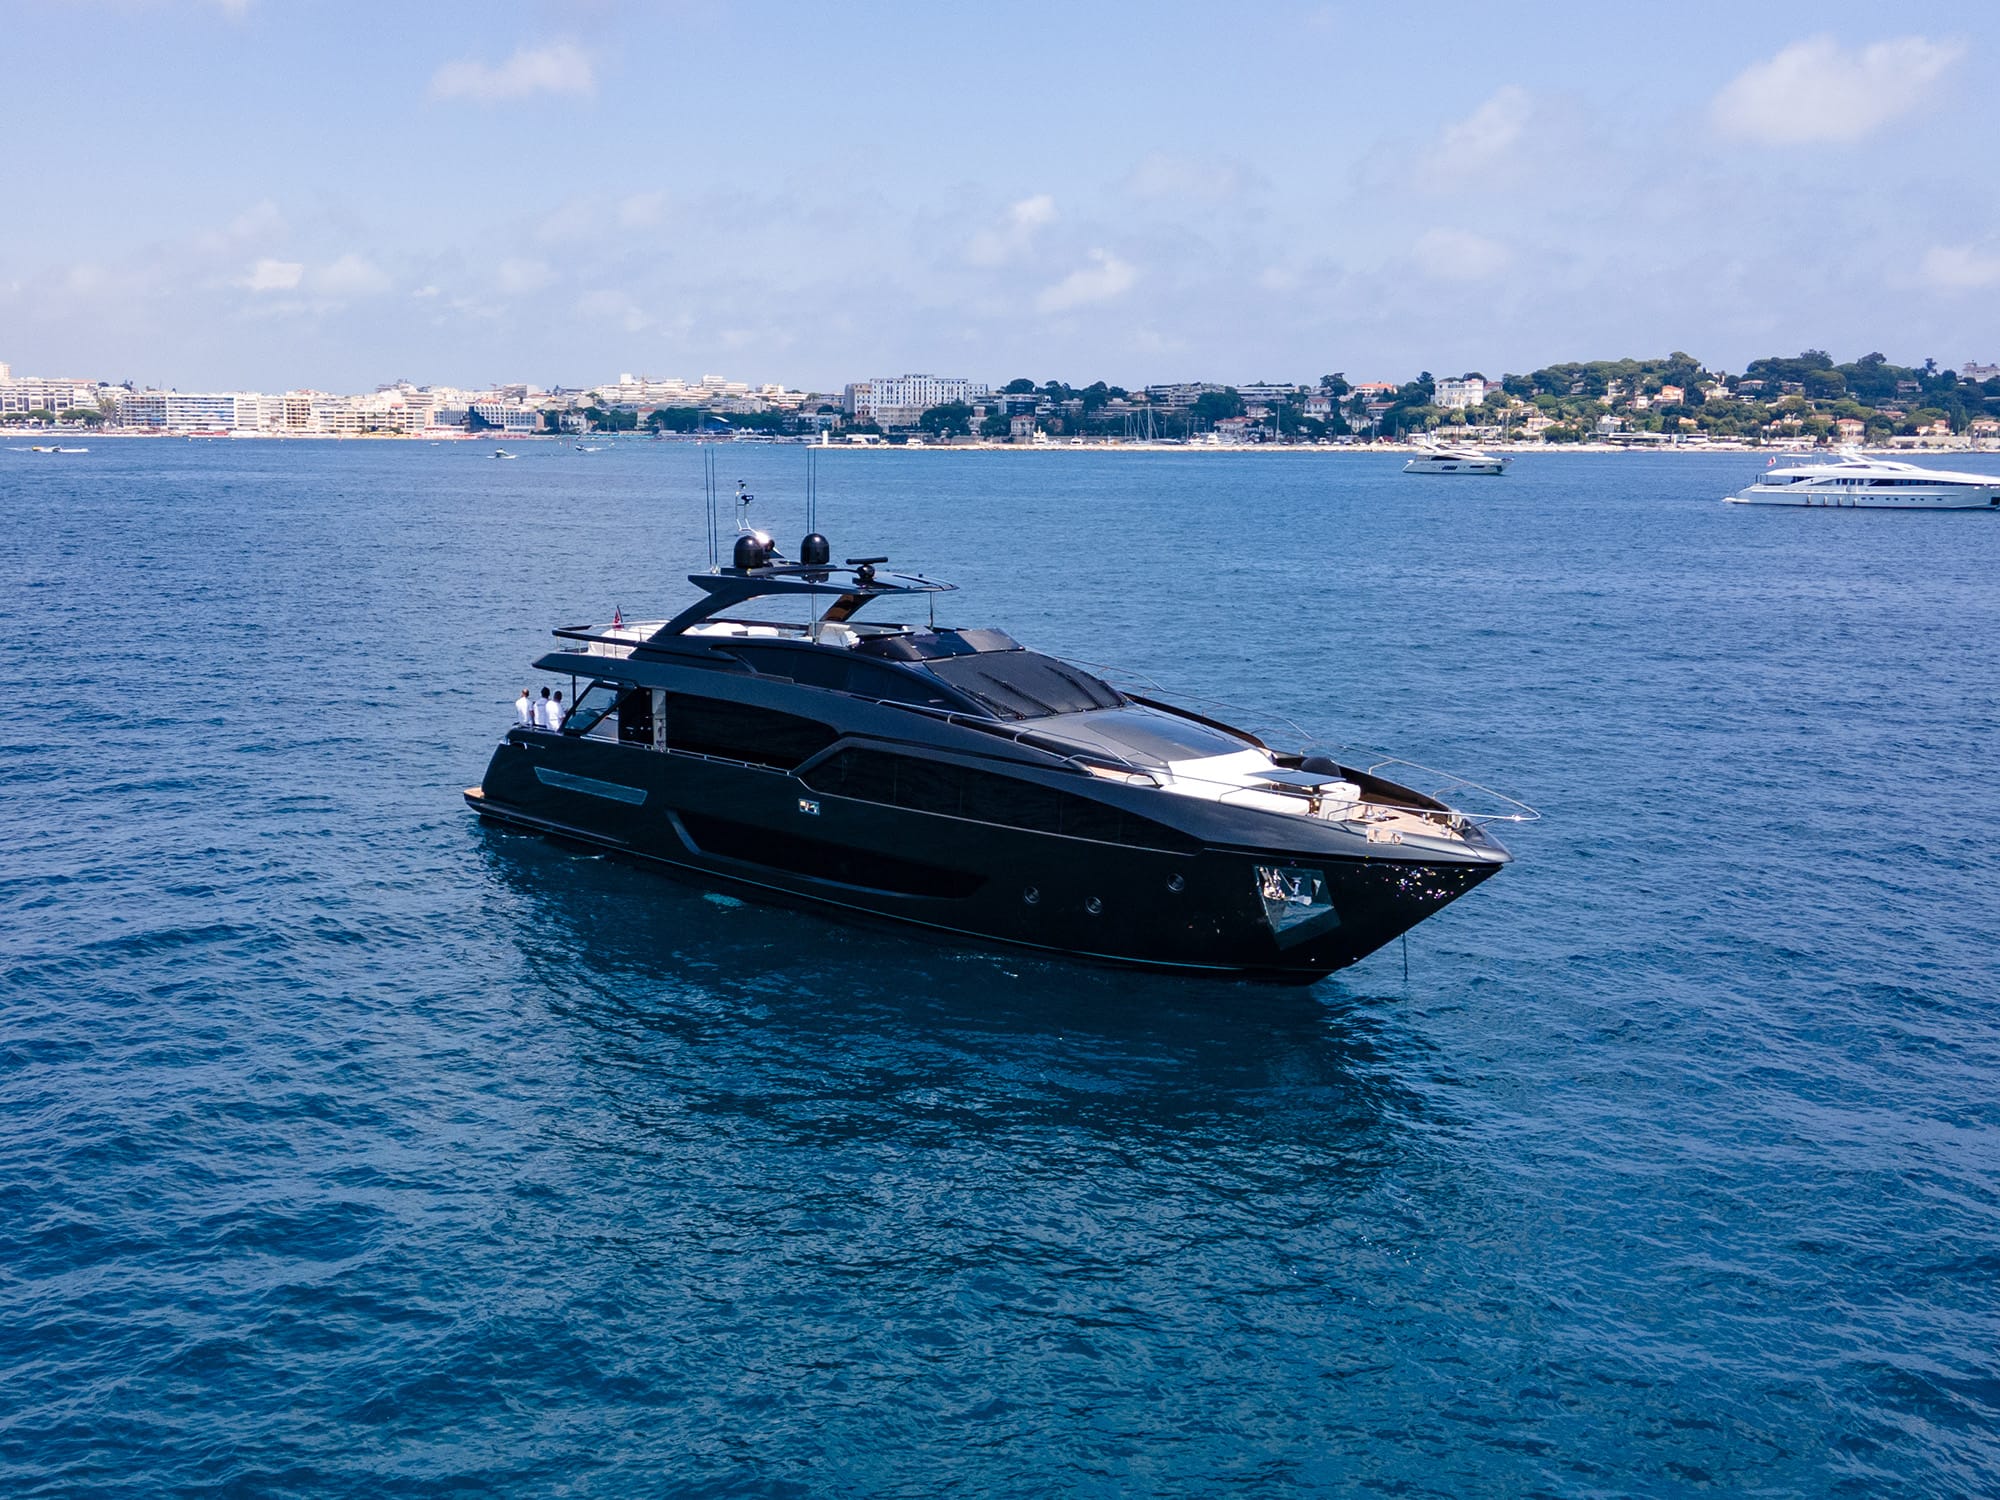 Riva 90 Argo Yacht for sale